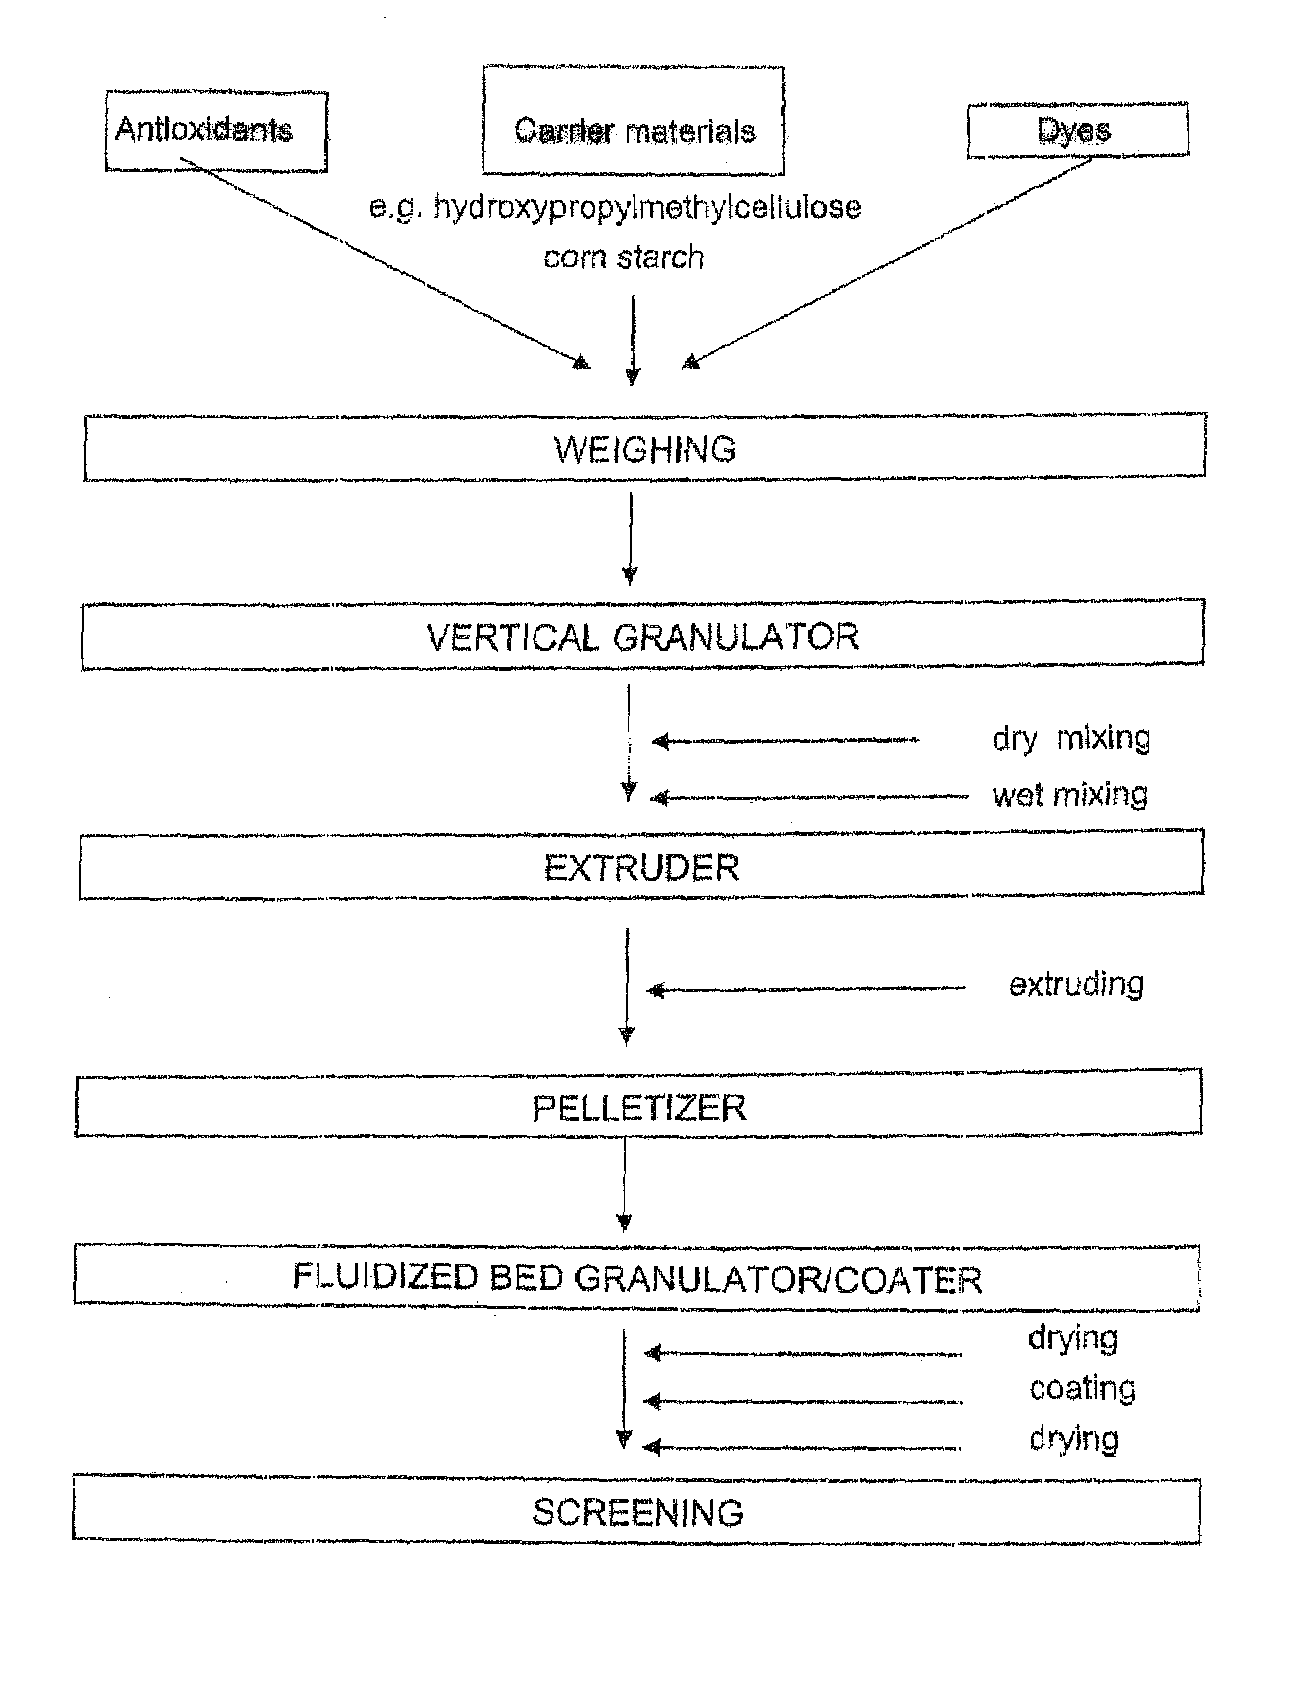 Dye-containing pellets for coloring keratin fibers